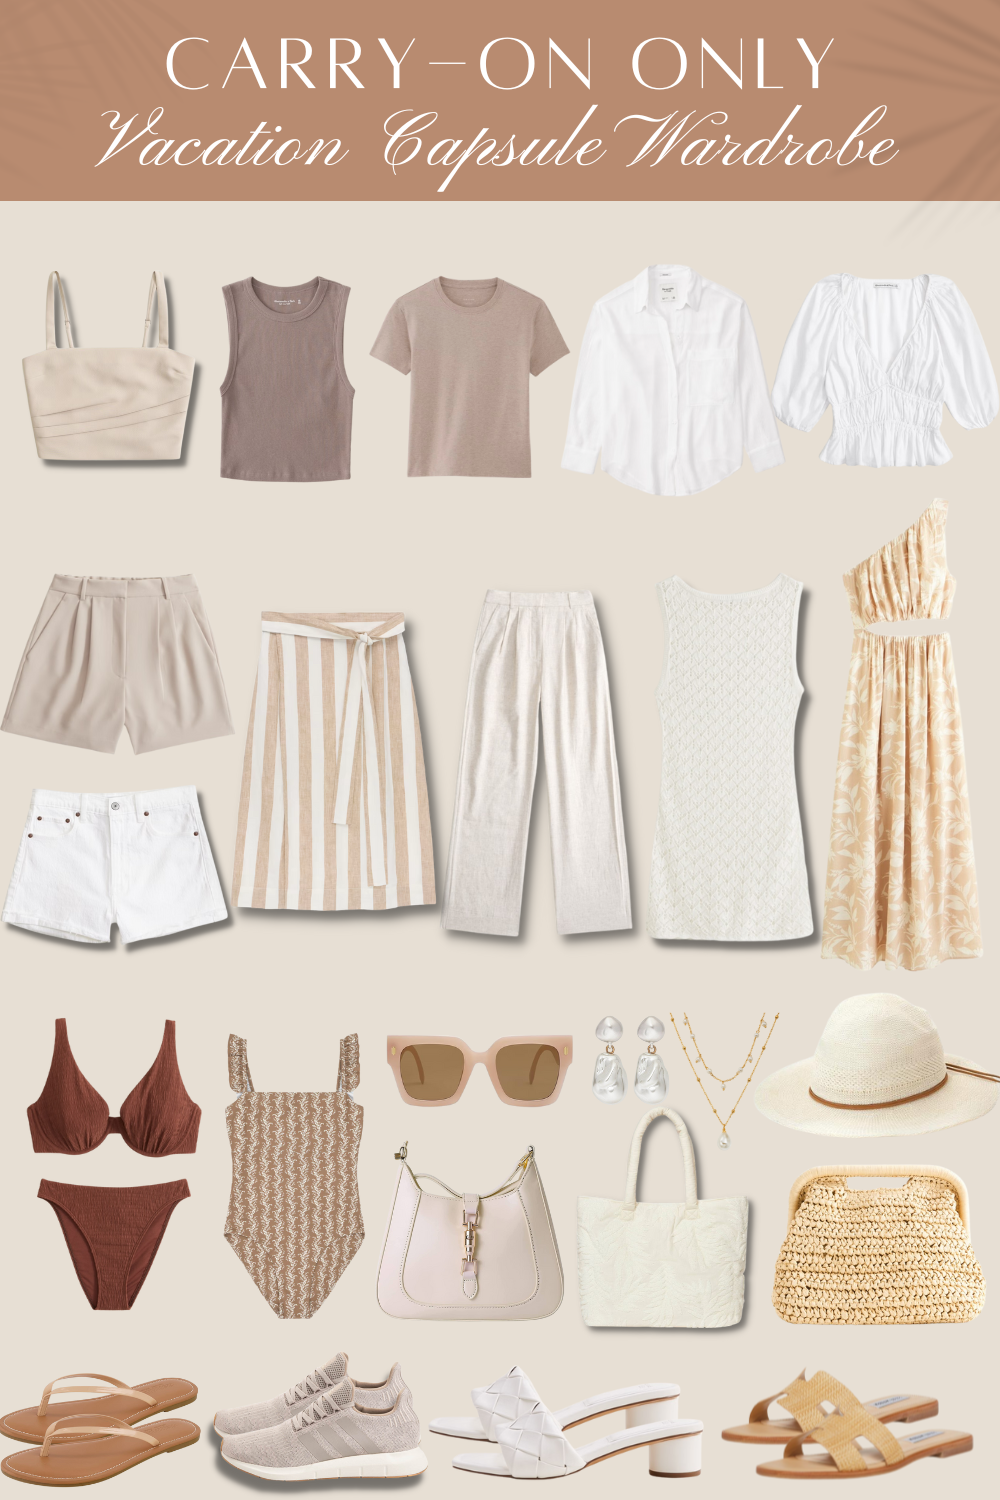 The Travel Capsule Wardrobe: Versatile Packing at its Finest